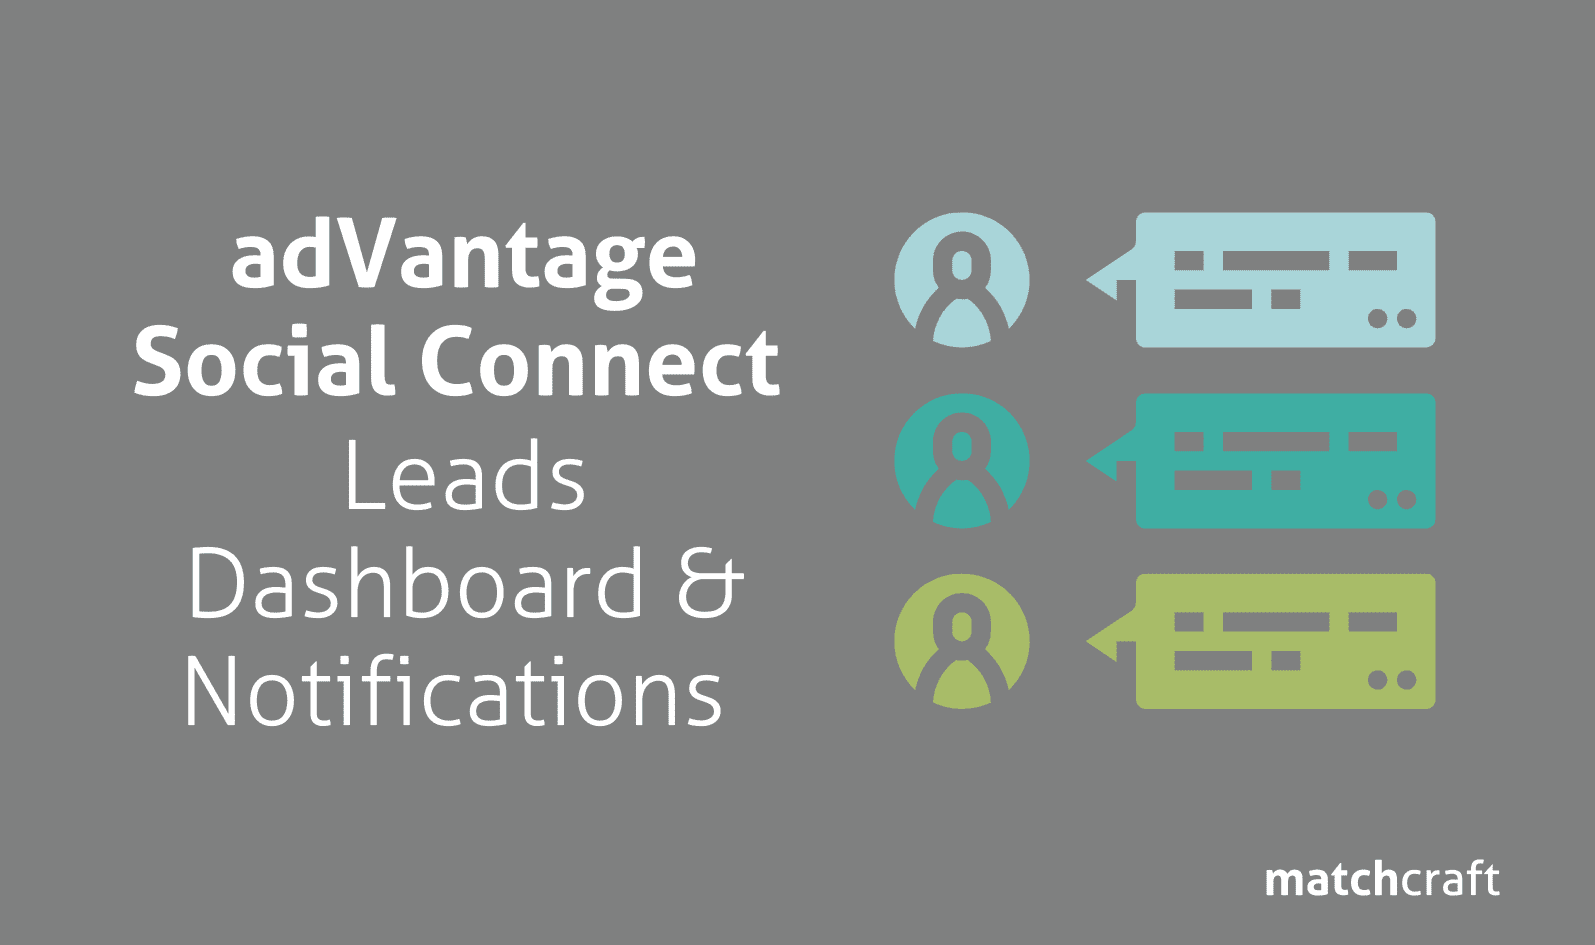 adVantage Social Connect Leads Dashboard & Notifications